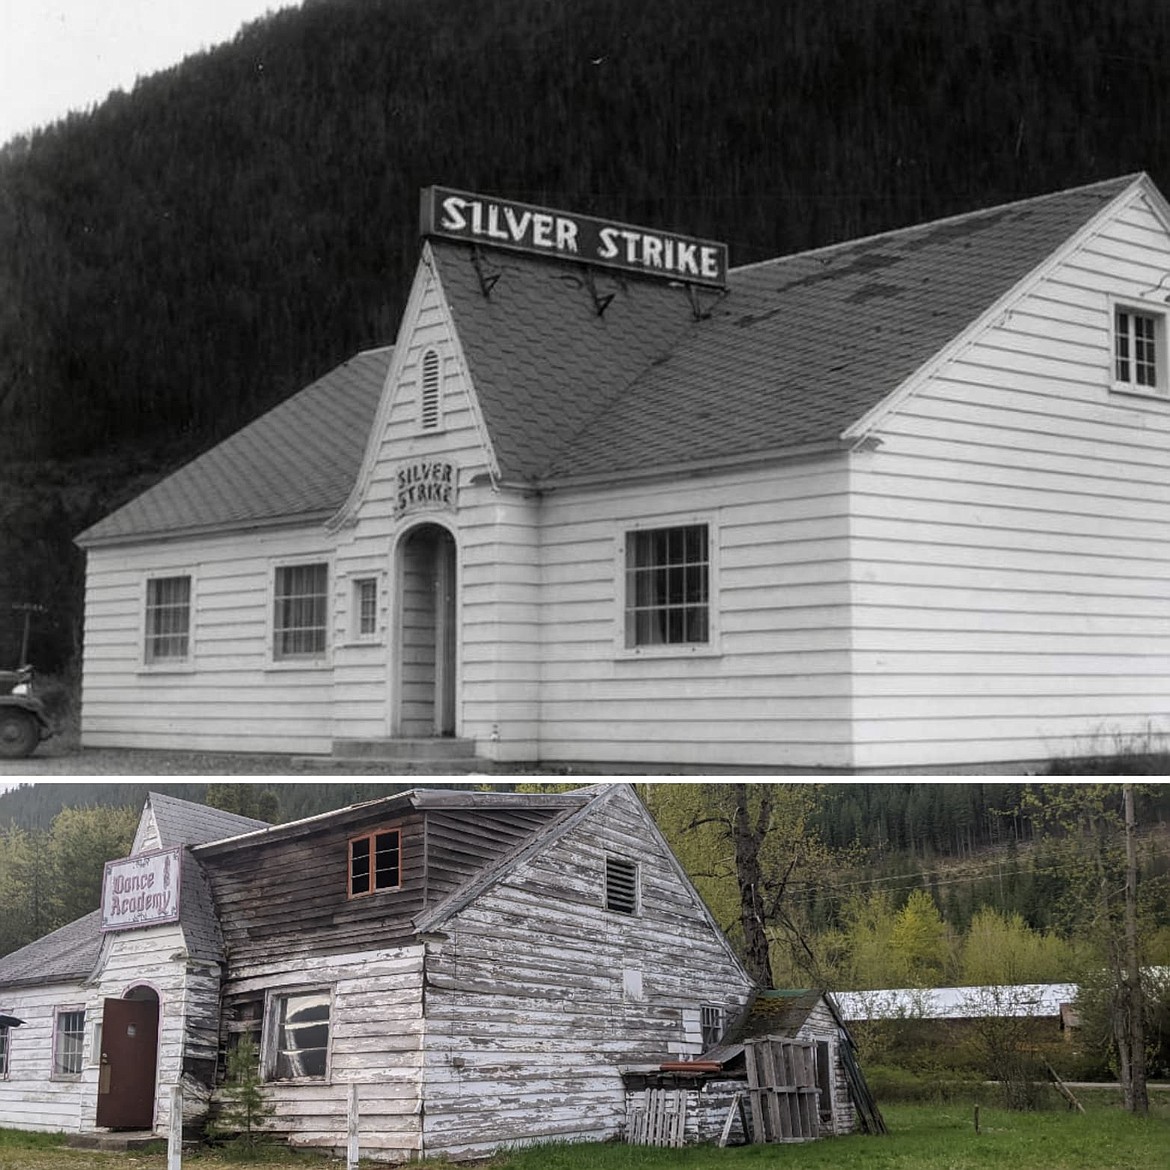 TOP: Silver Strike Tavern from the Barnard Stockbridge Collection from the 1930s. BOTTOM: Current state of the structure.